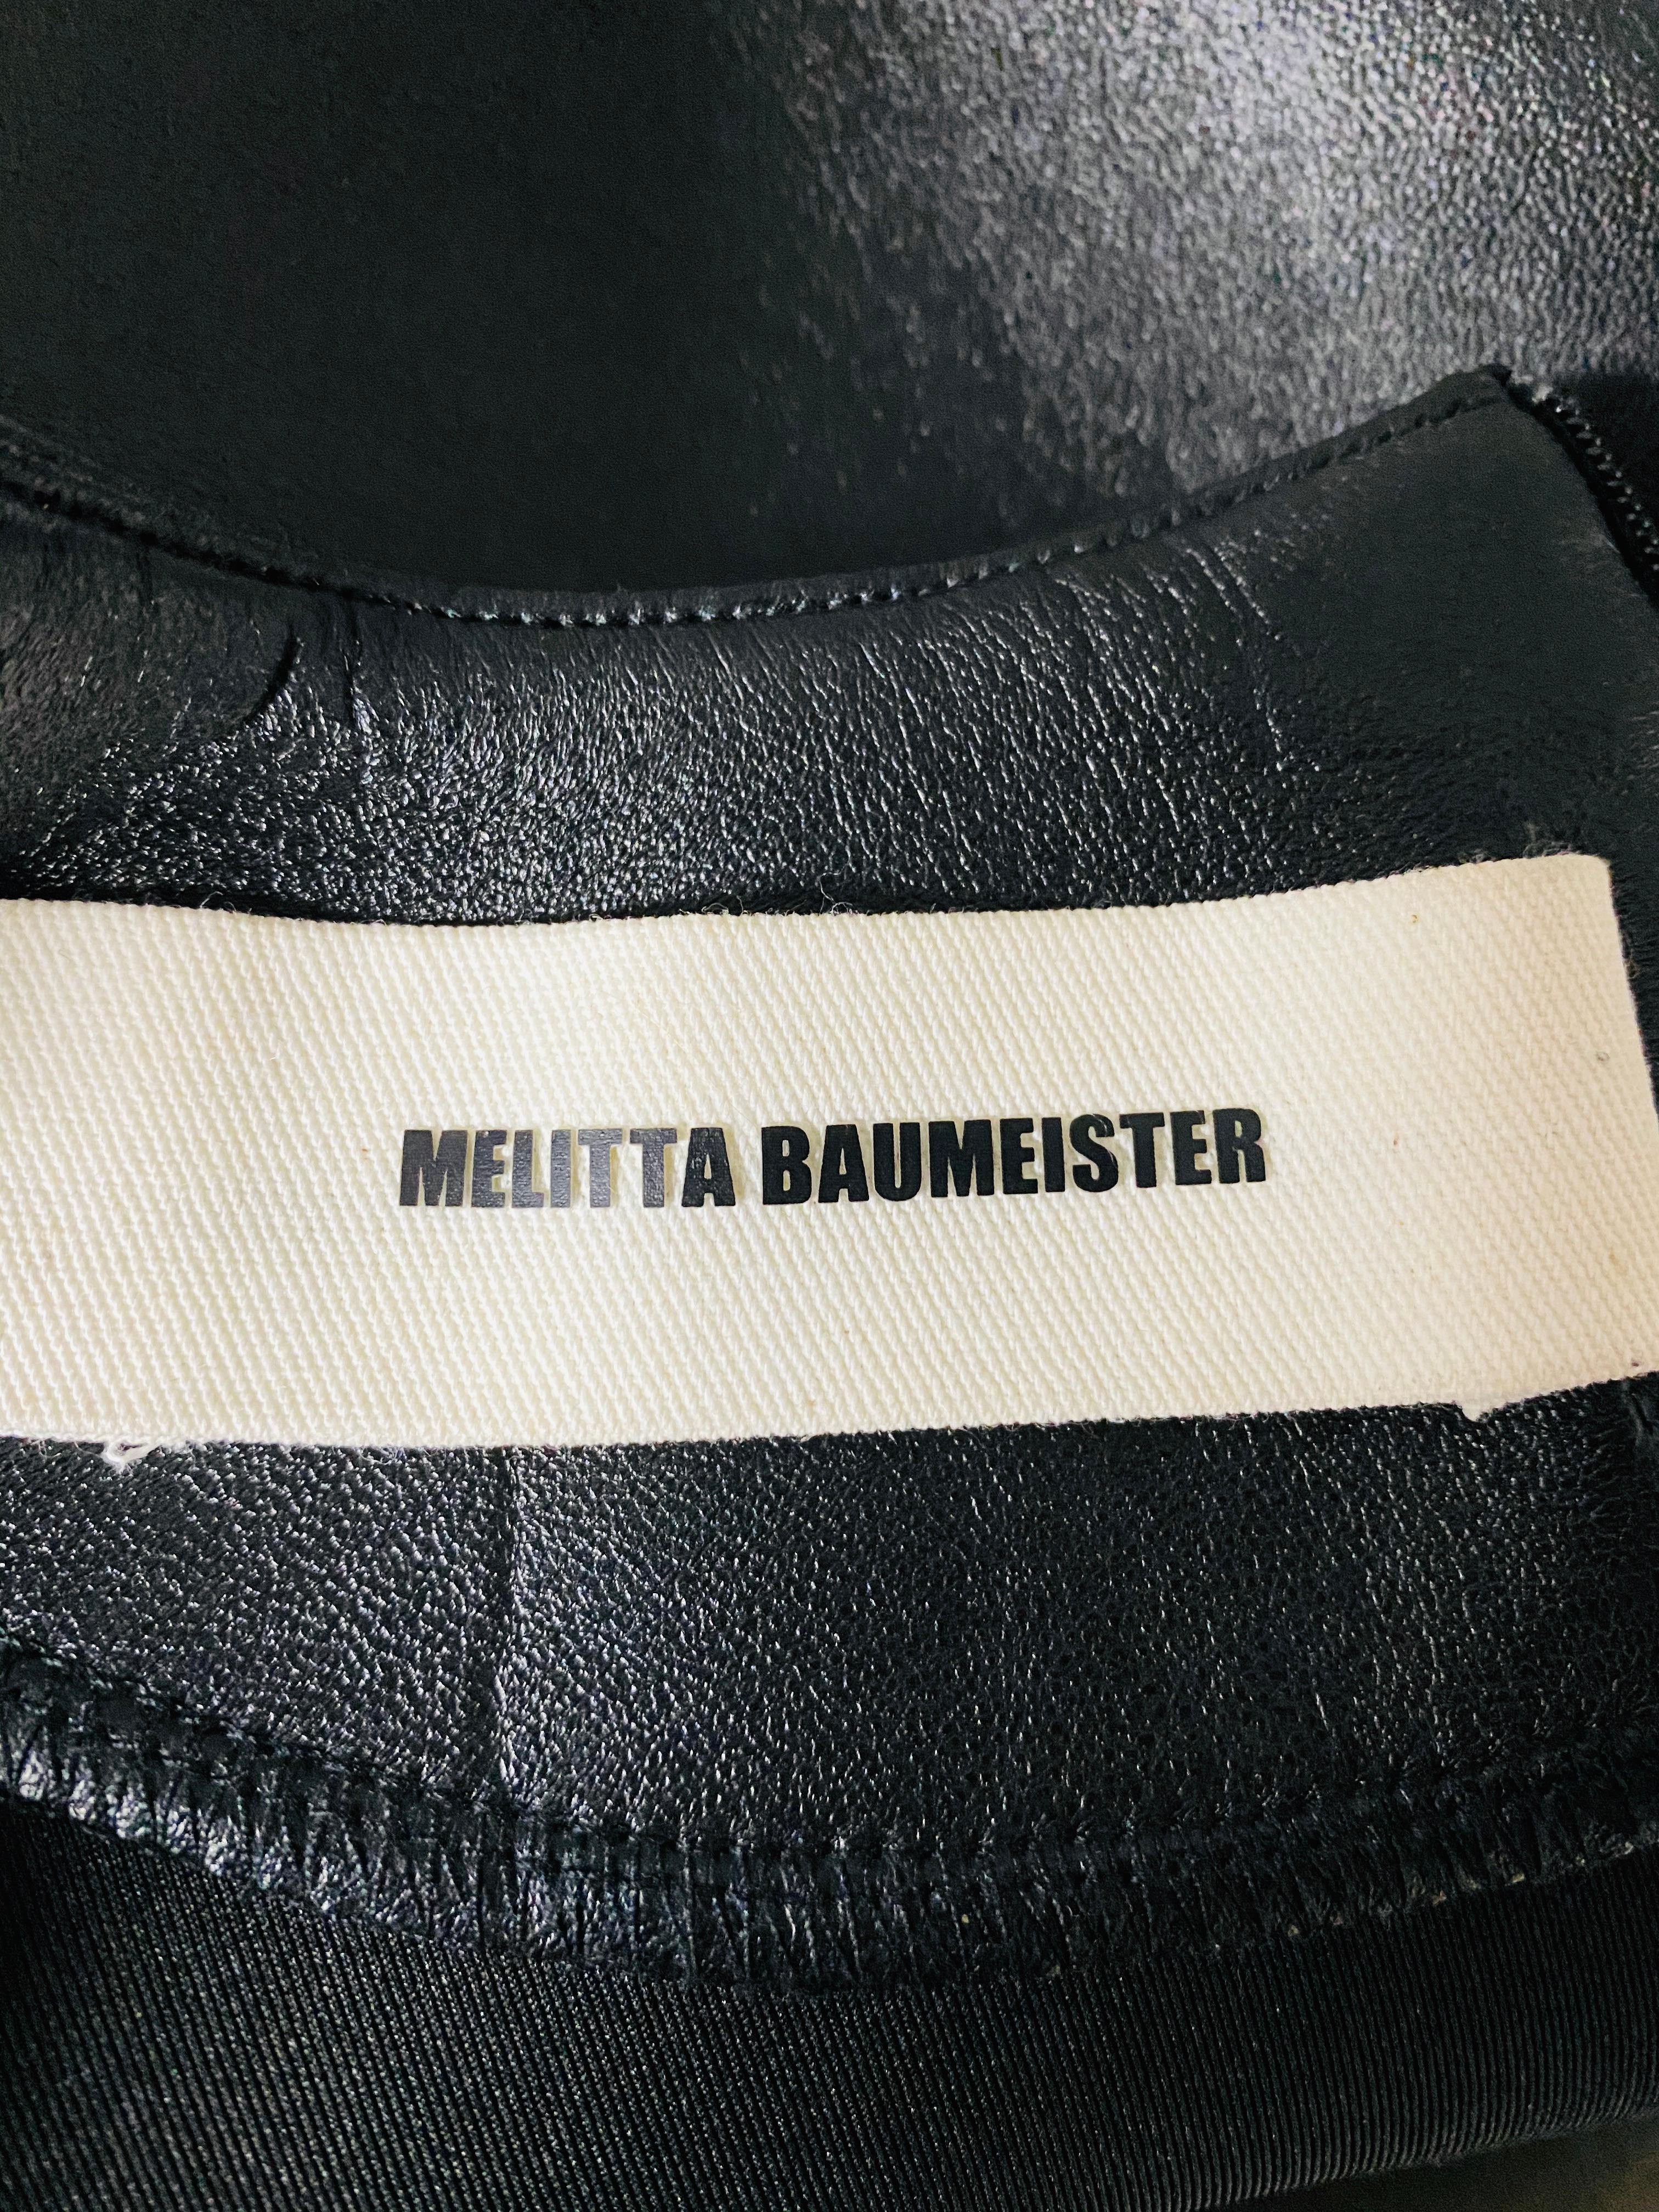 Melitta Baumeister Black Faux Leather Sleeveless Maxi Dress For Sale 3